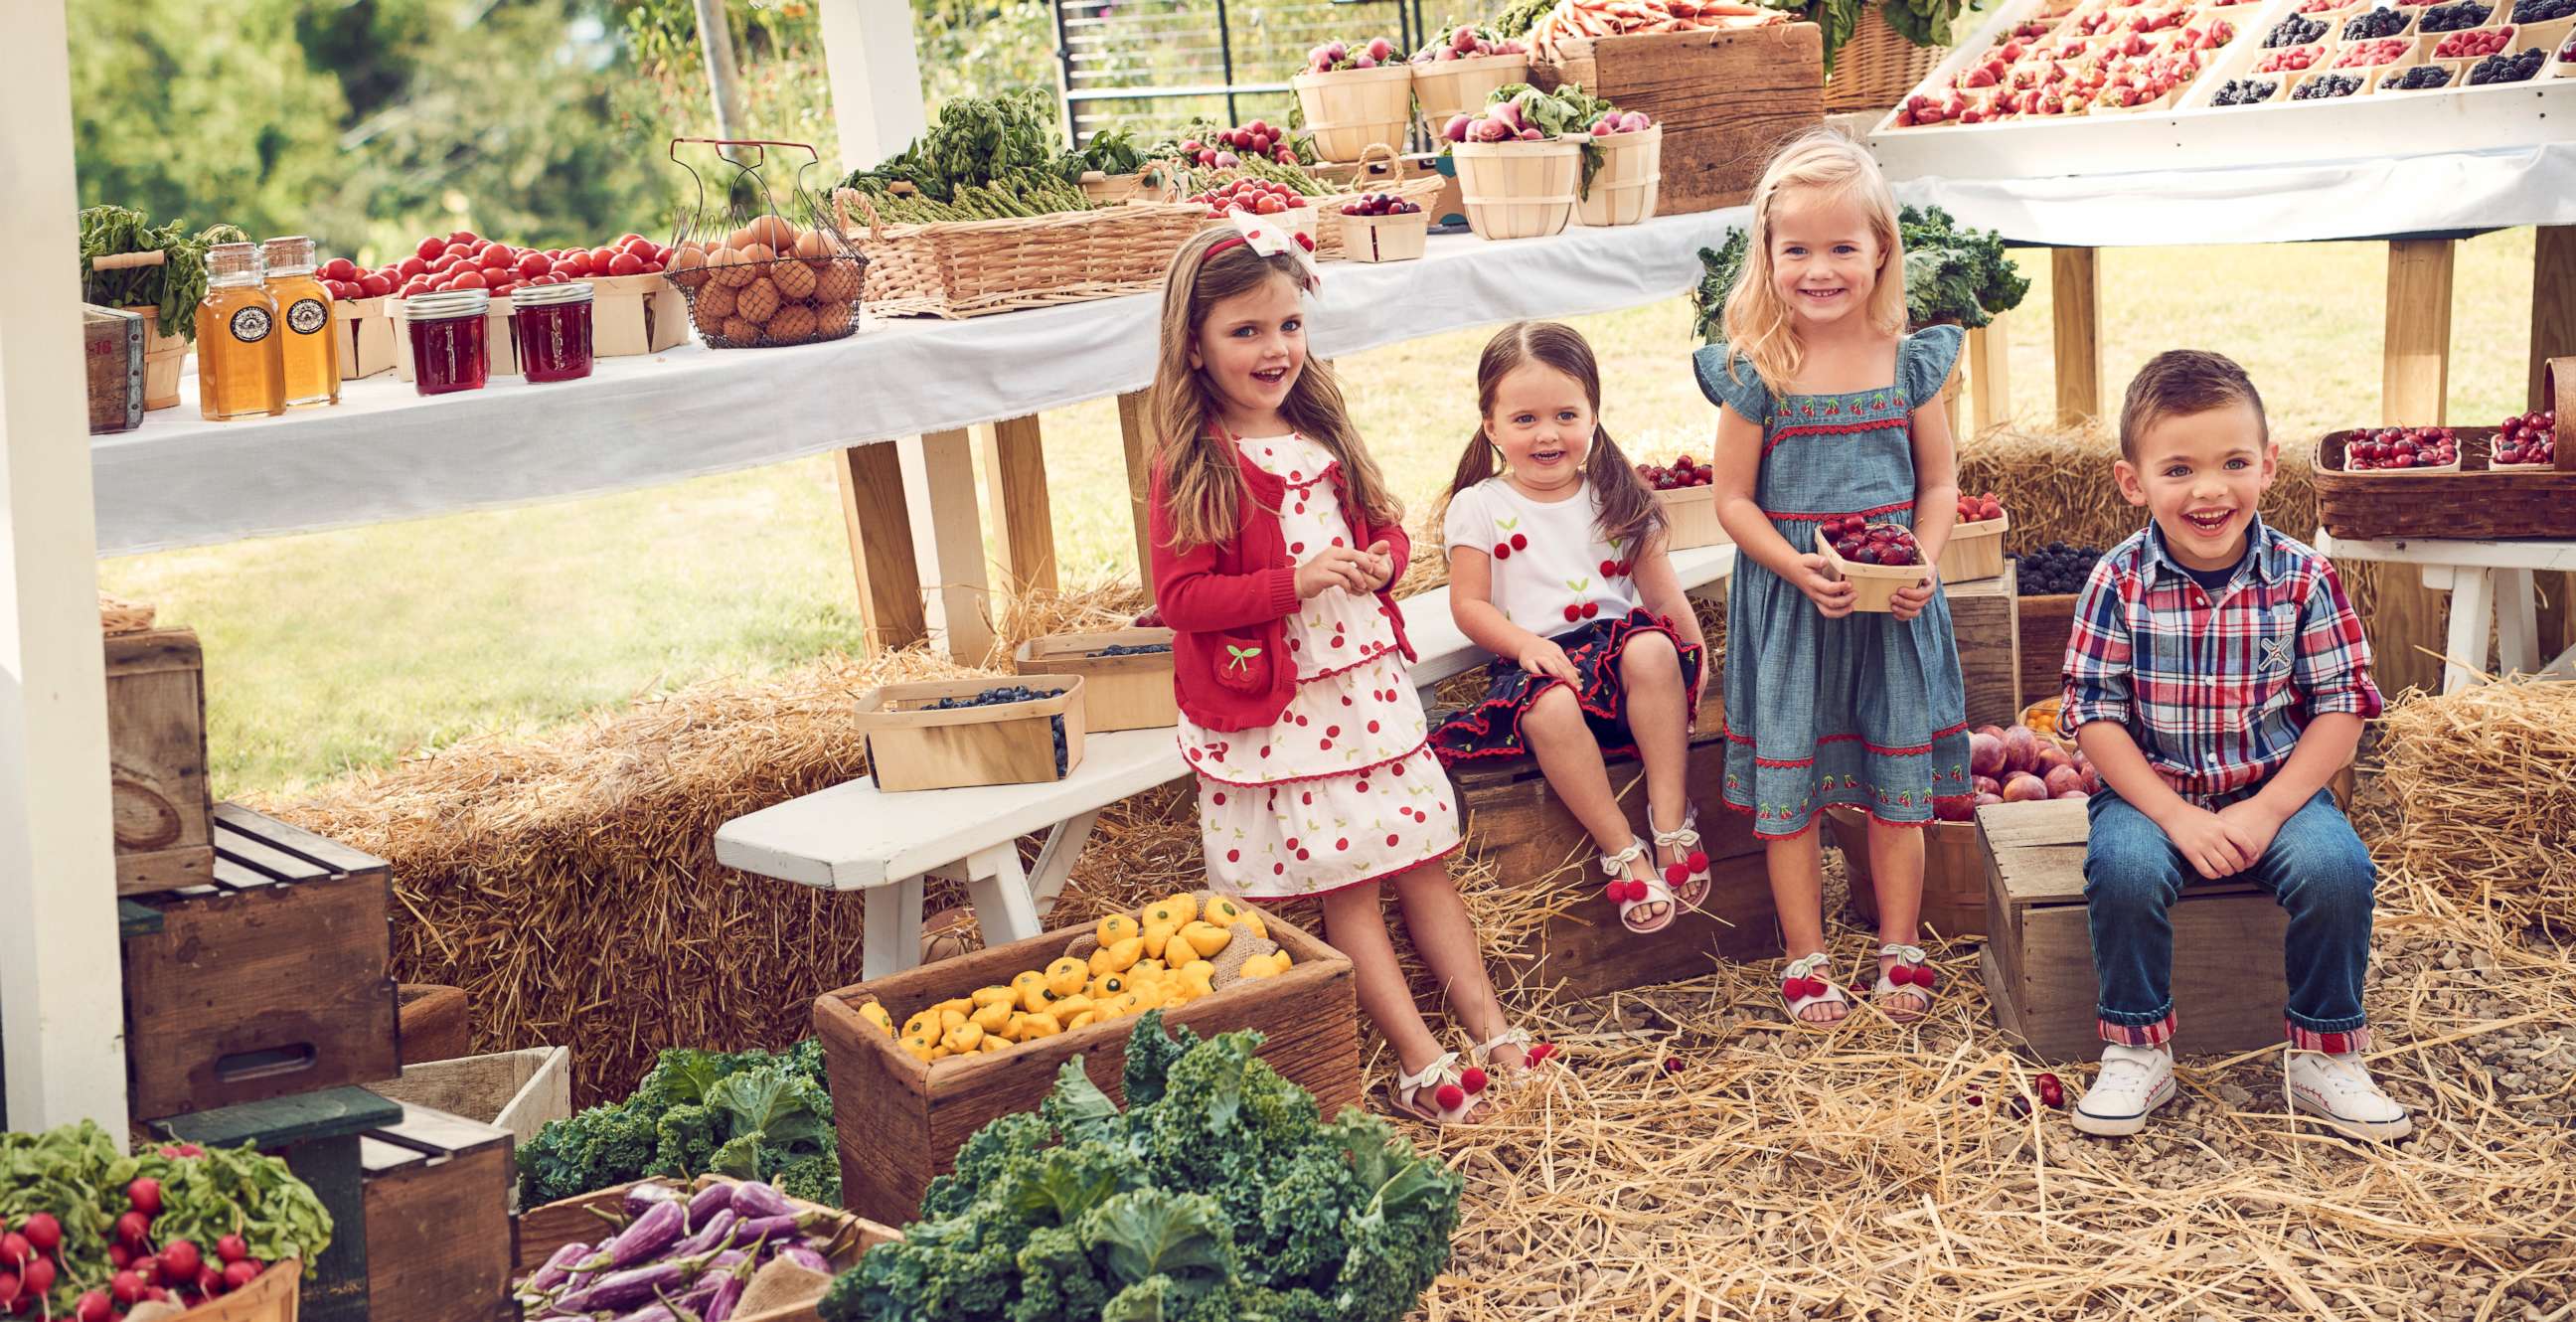 PHOTO: Gymboree is relaunching its brand of children's clothes.